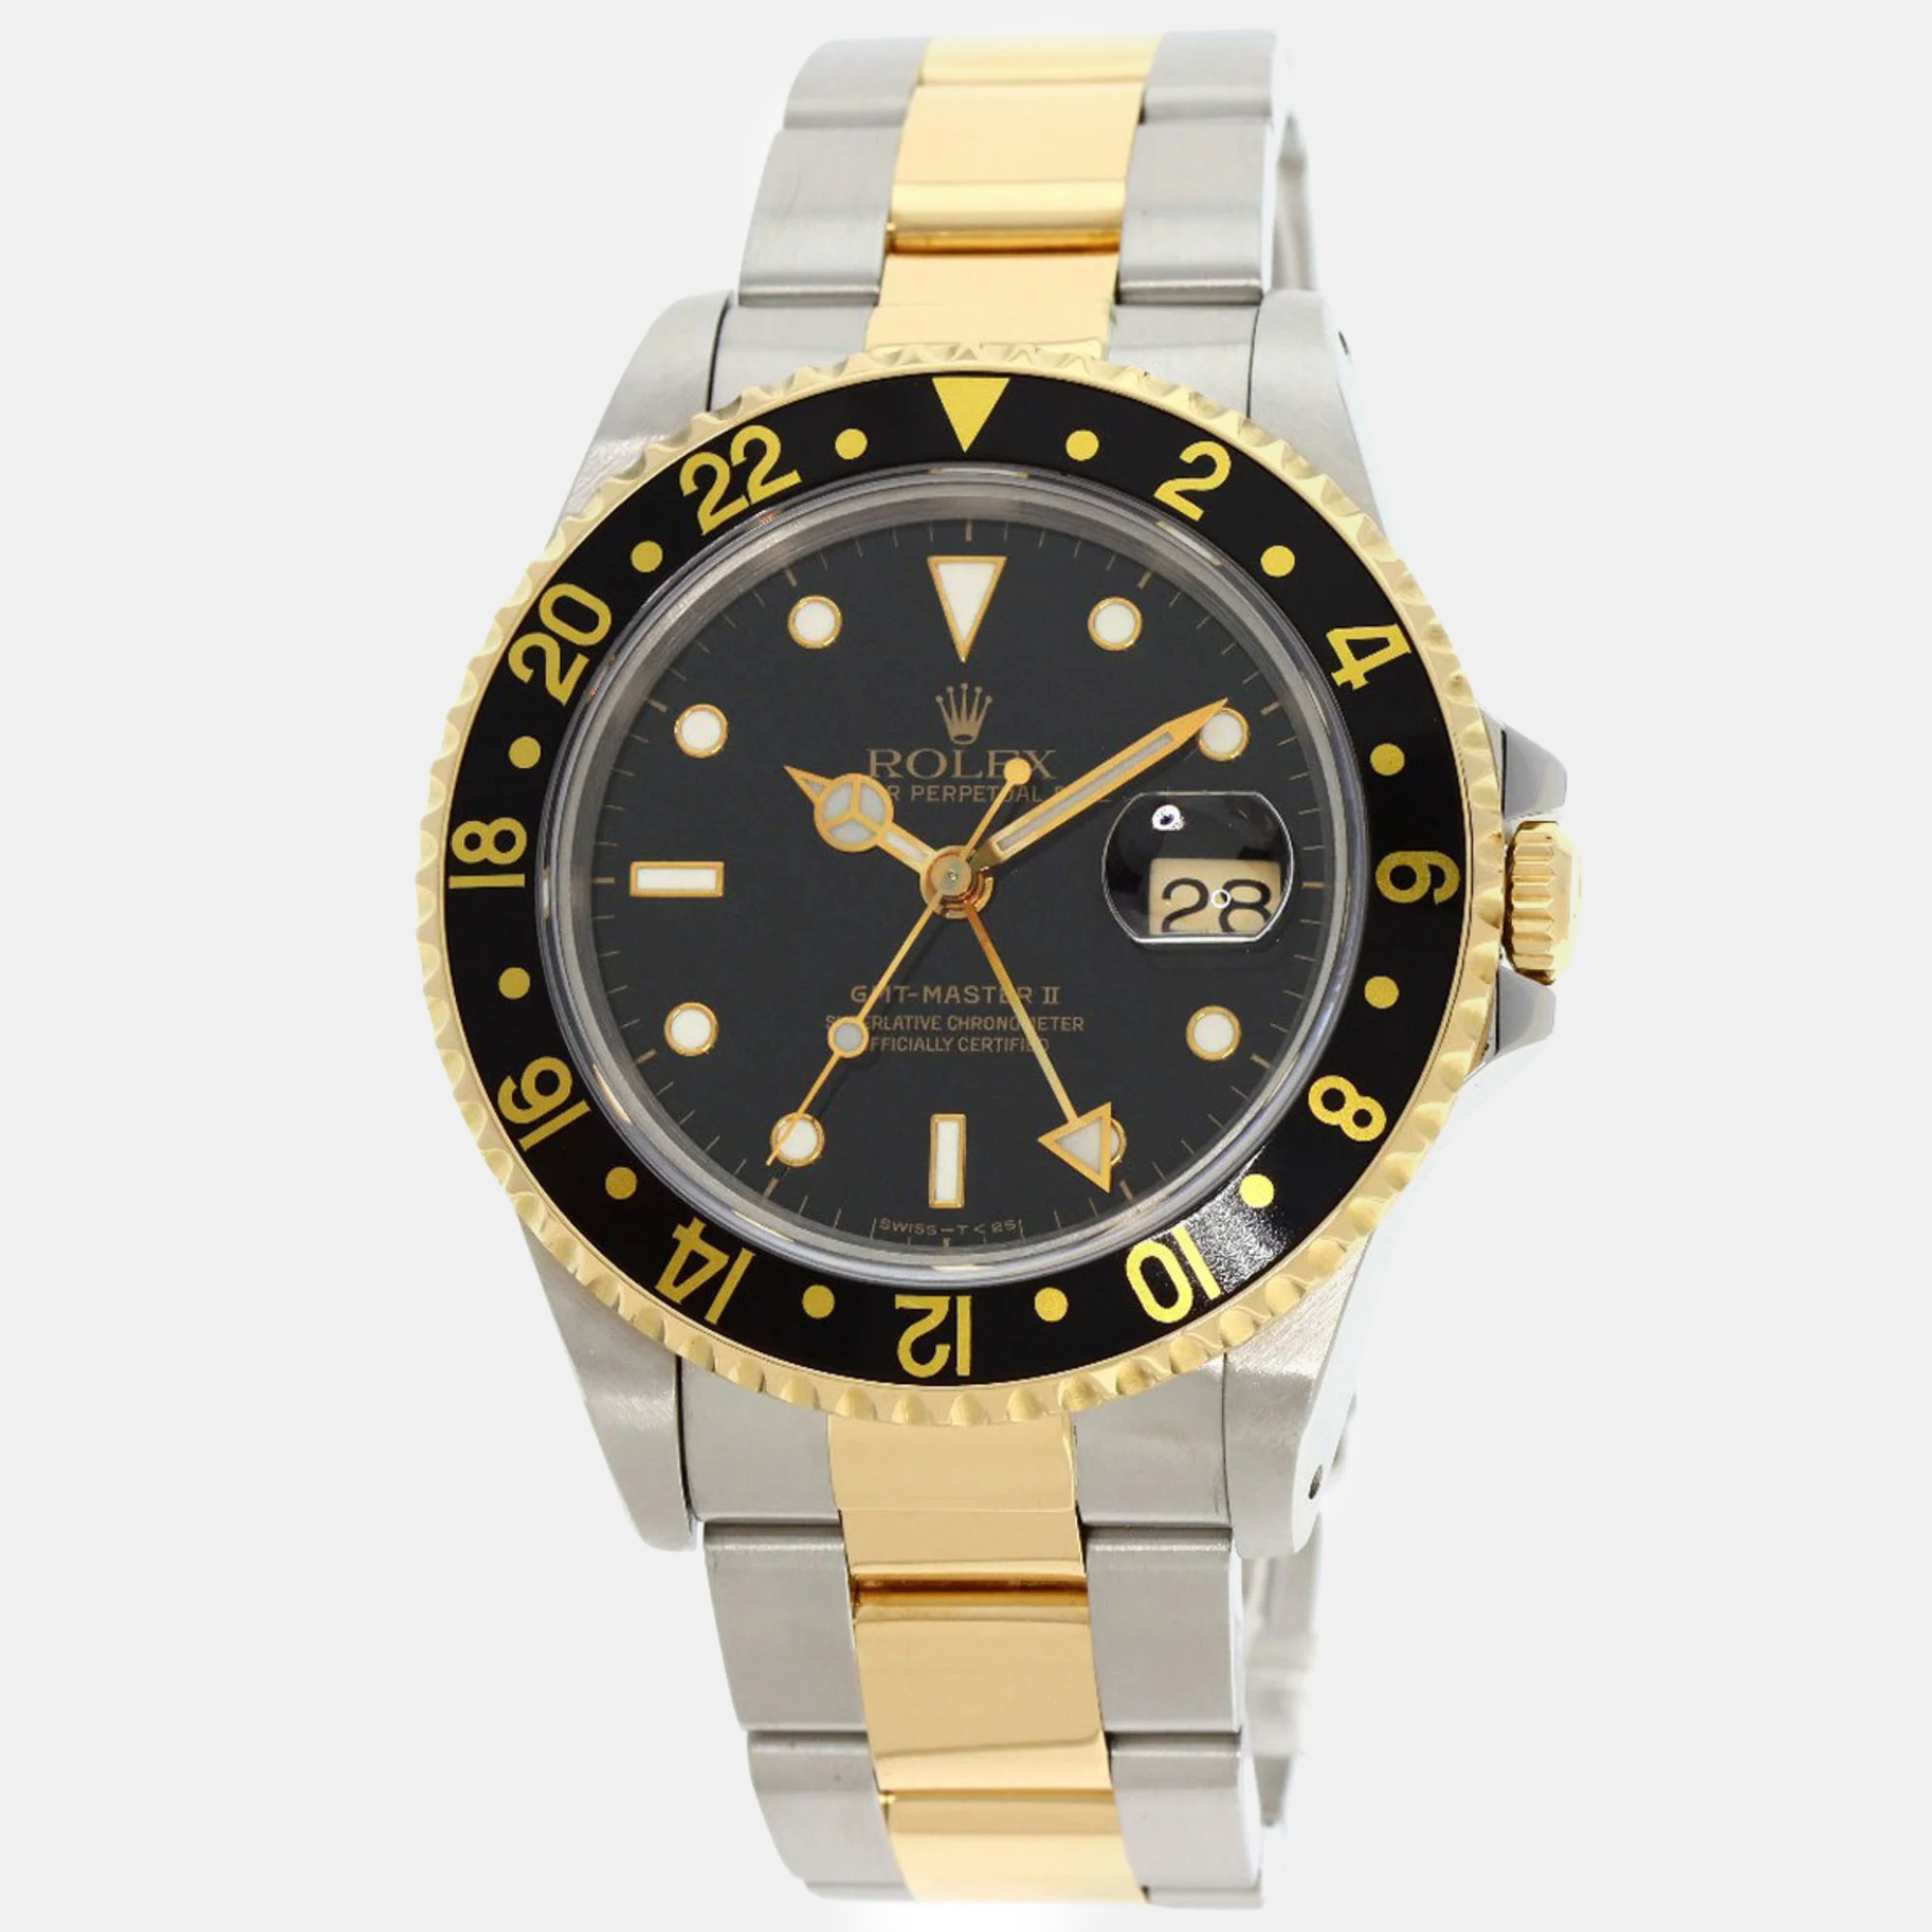 Rolex black 18k yellow gold stainless steel gmt-master ii 16713 automatic men's wristwatch 47 mm